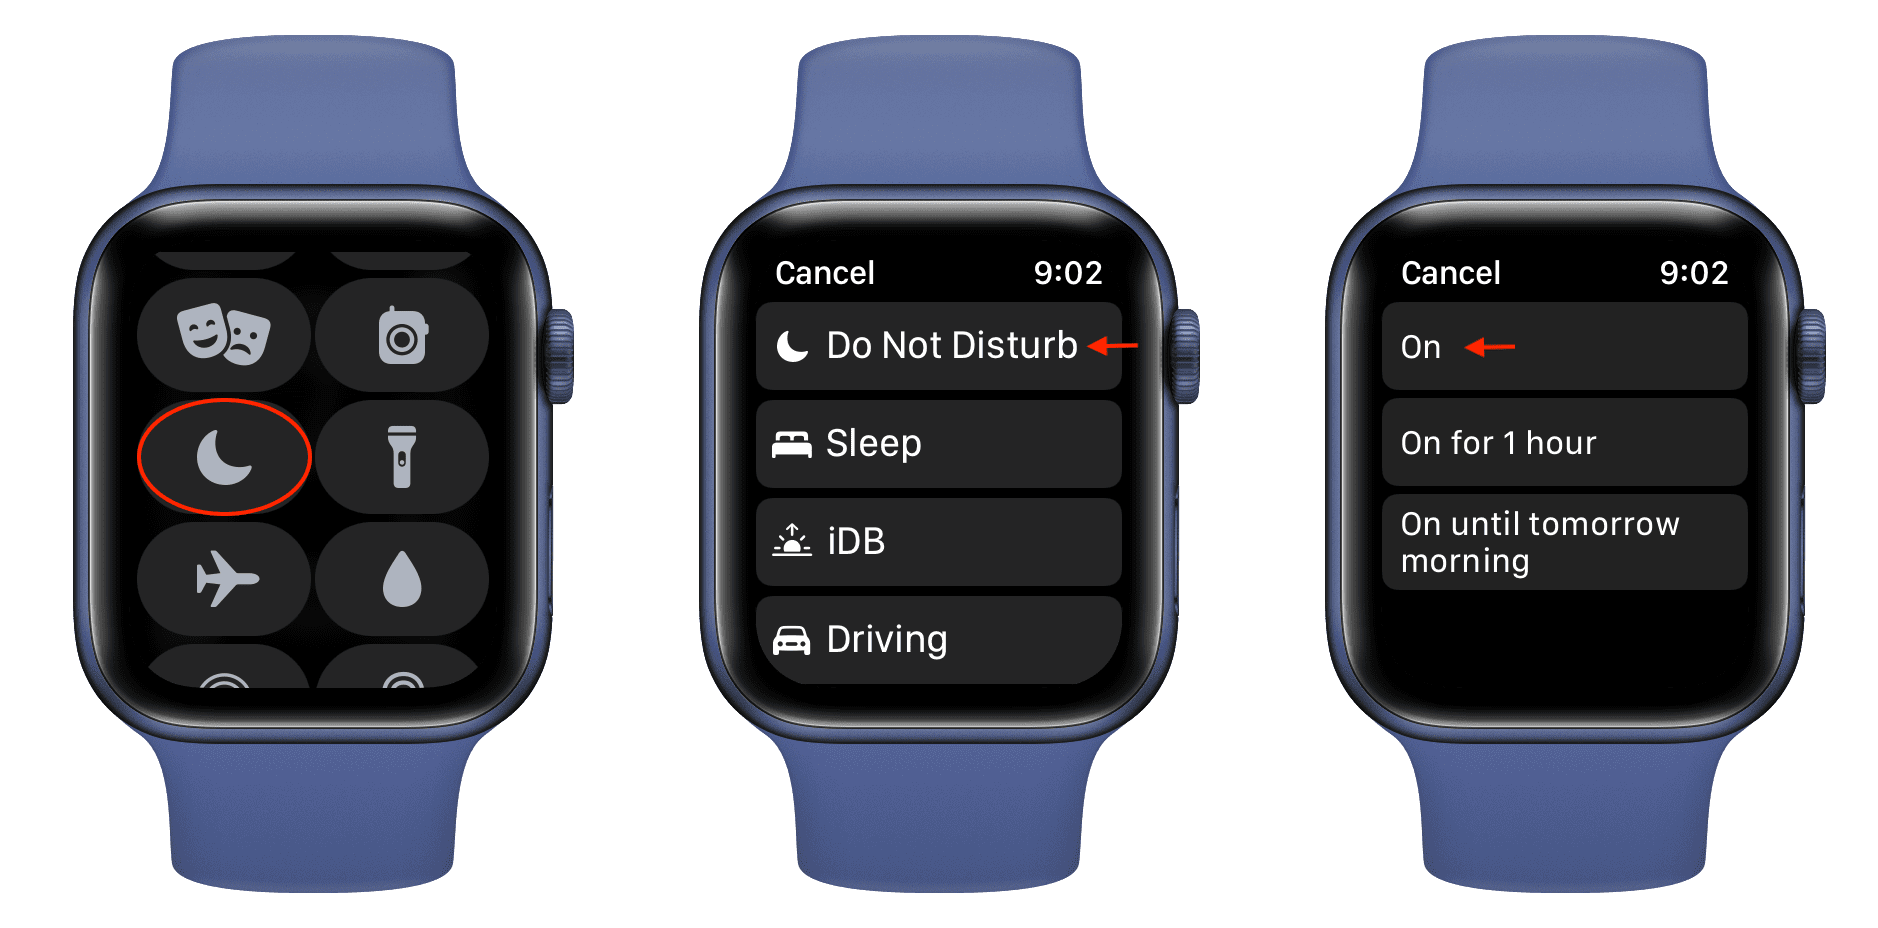 Enable Do Not Disturb on Apple Watch to stop incoming call notifications